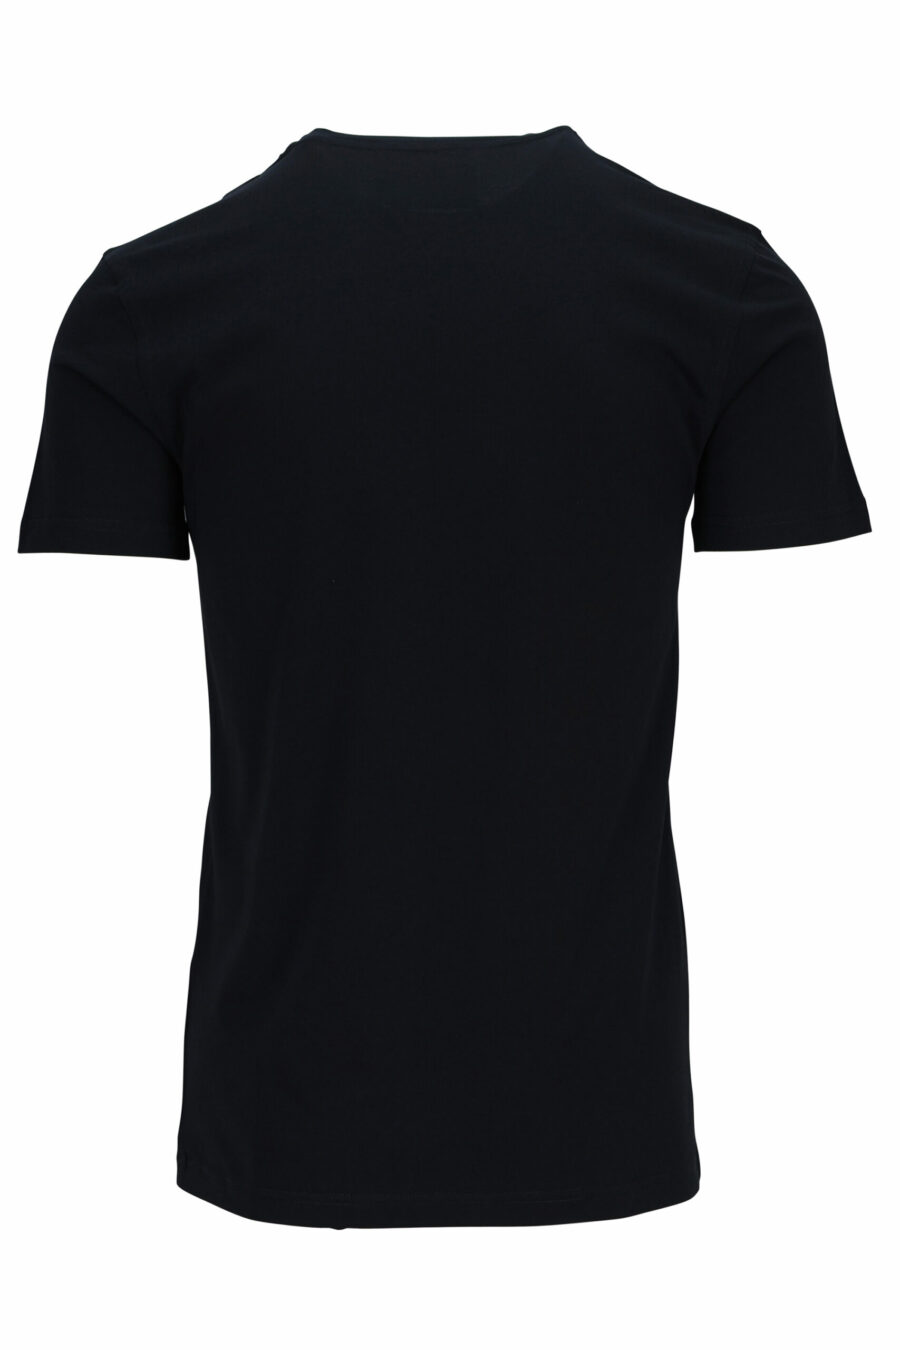 T-shirt black with "teddy" tailor's maxilogo - 667113108032 1 1 scaled